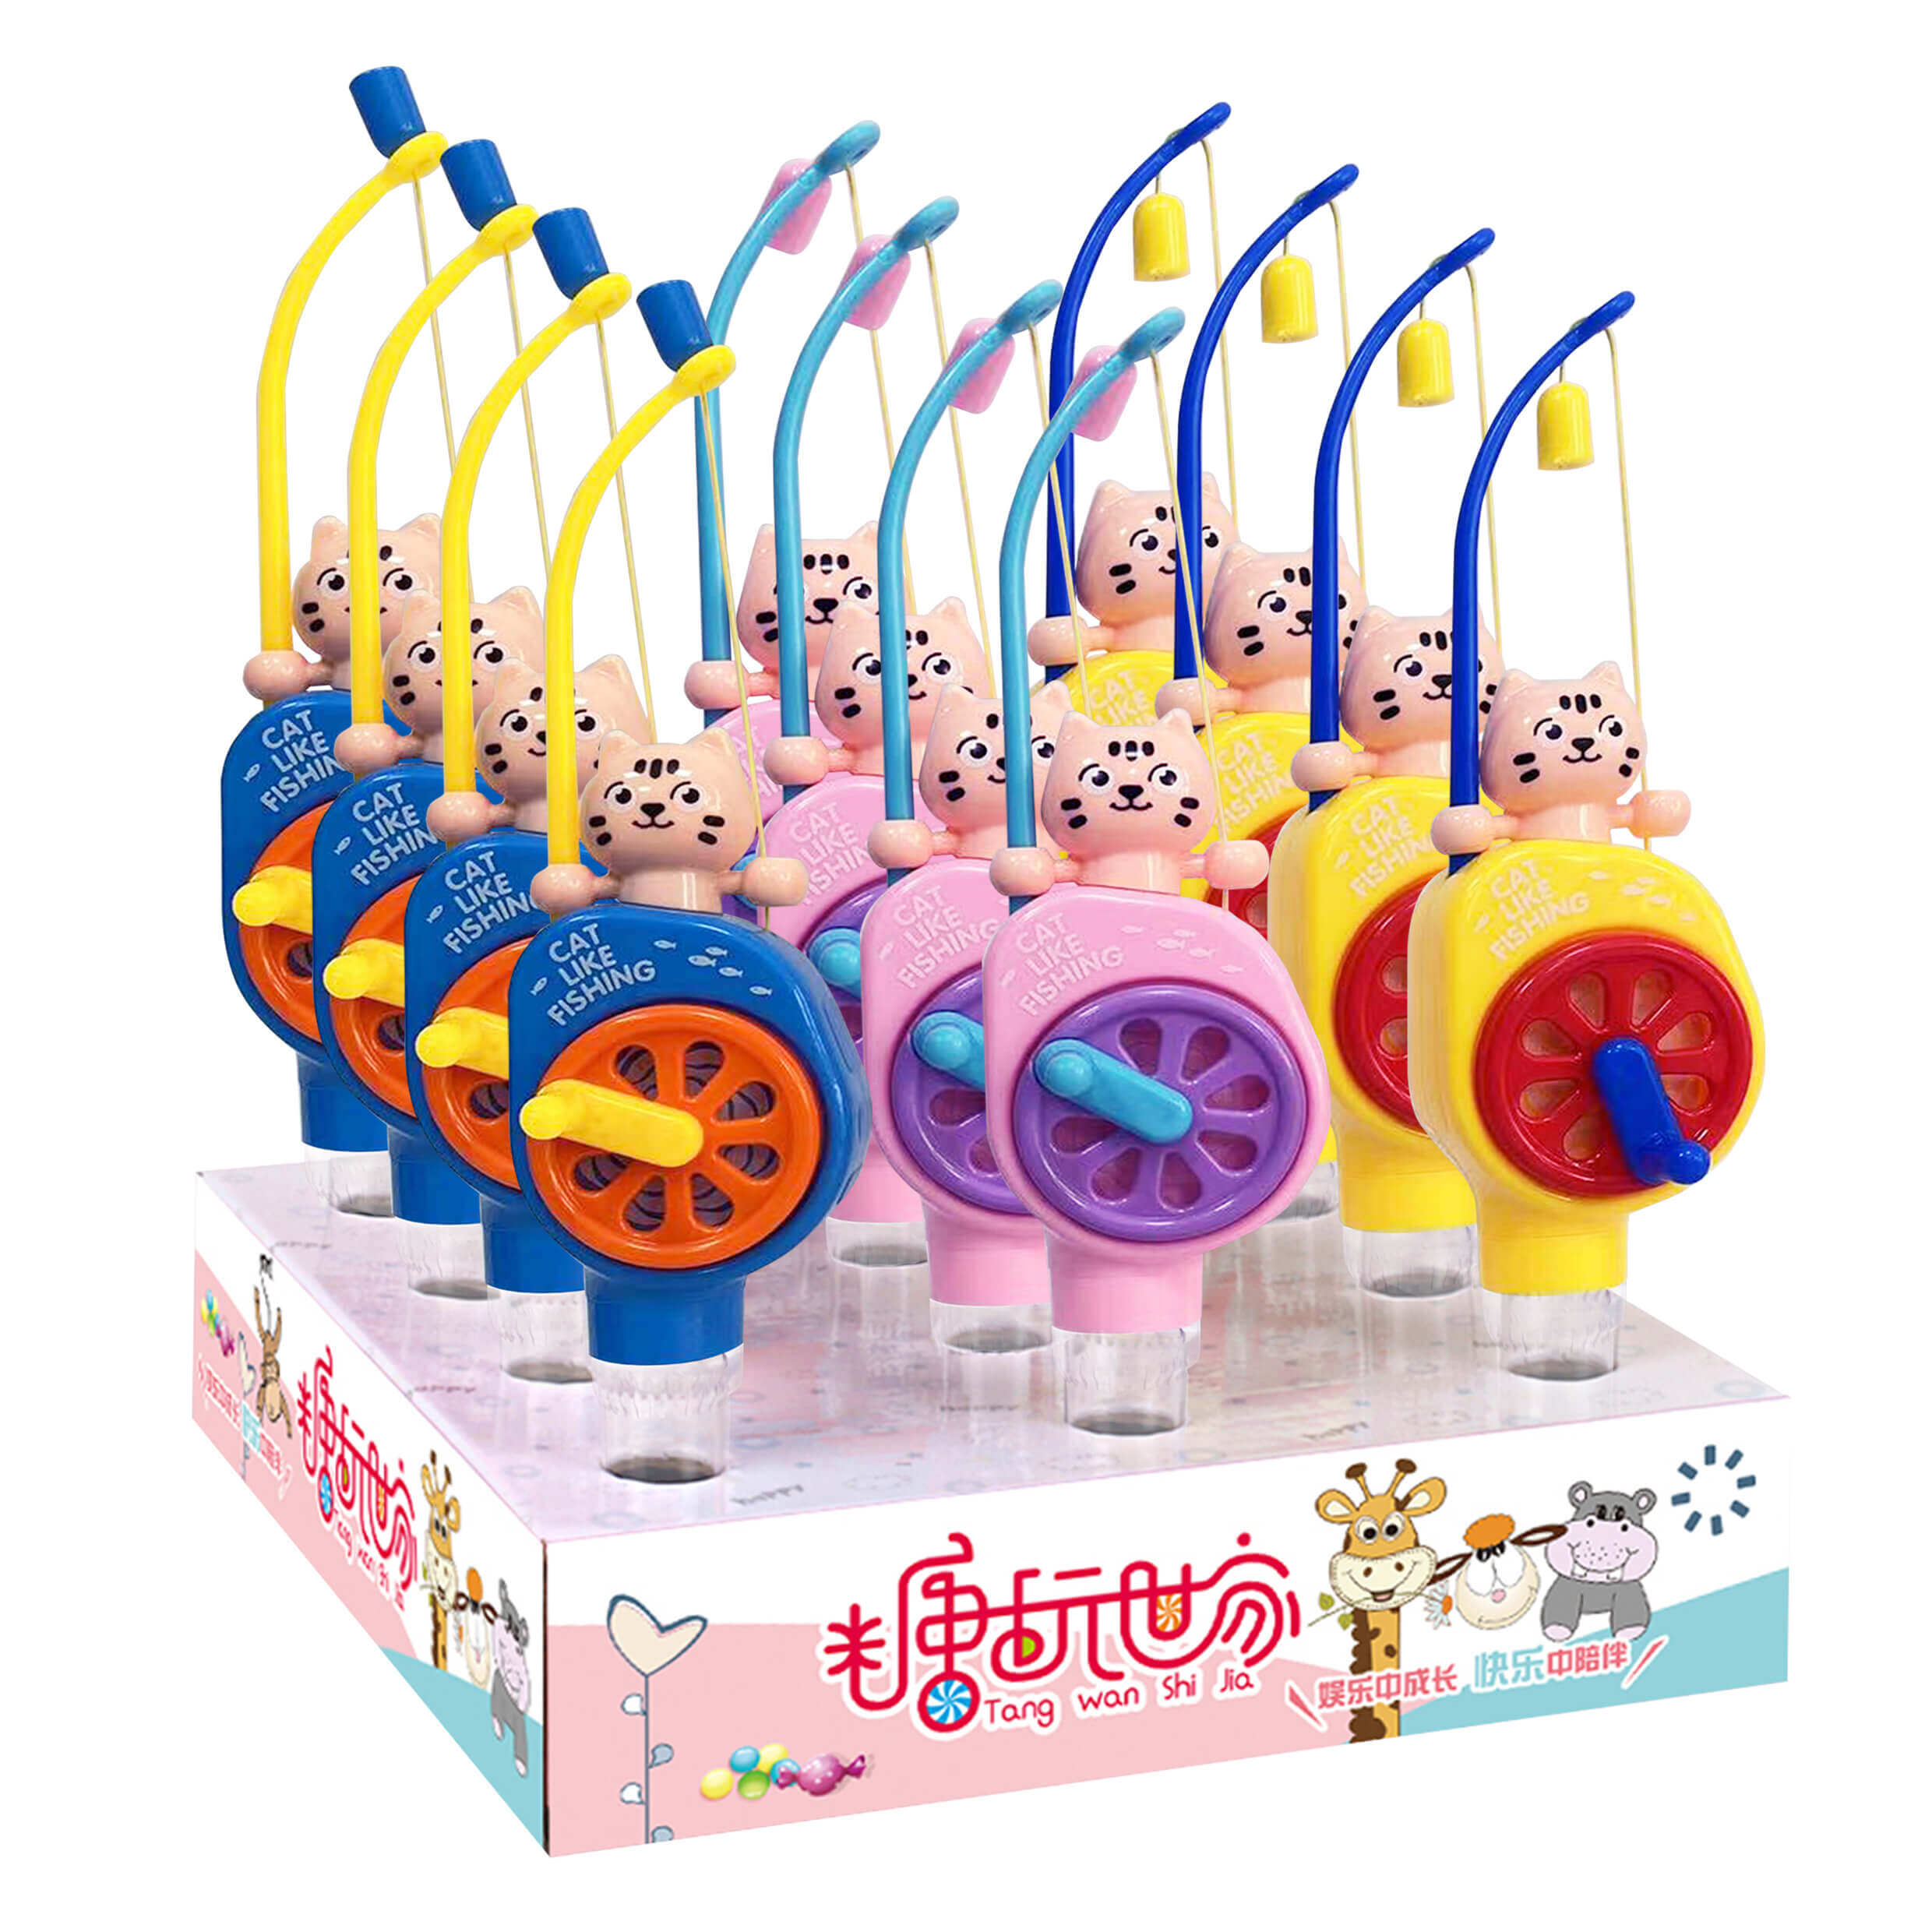 candy tubes wholesale,candy kids toys